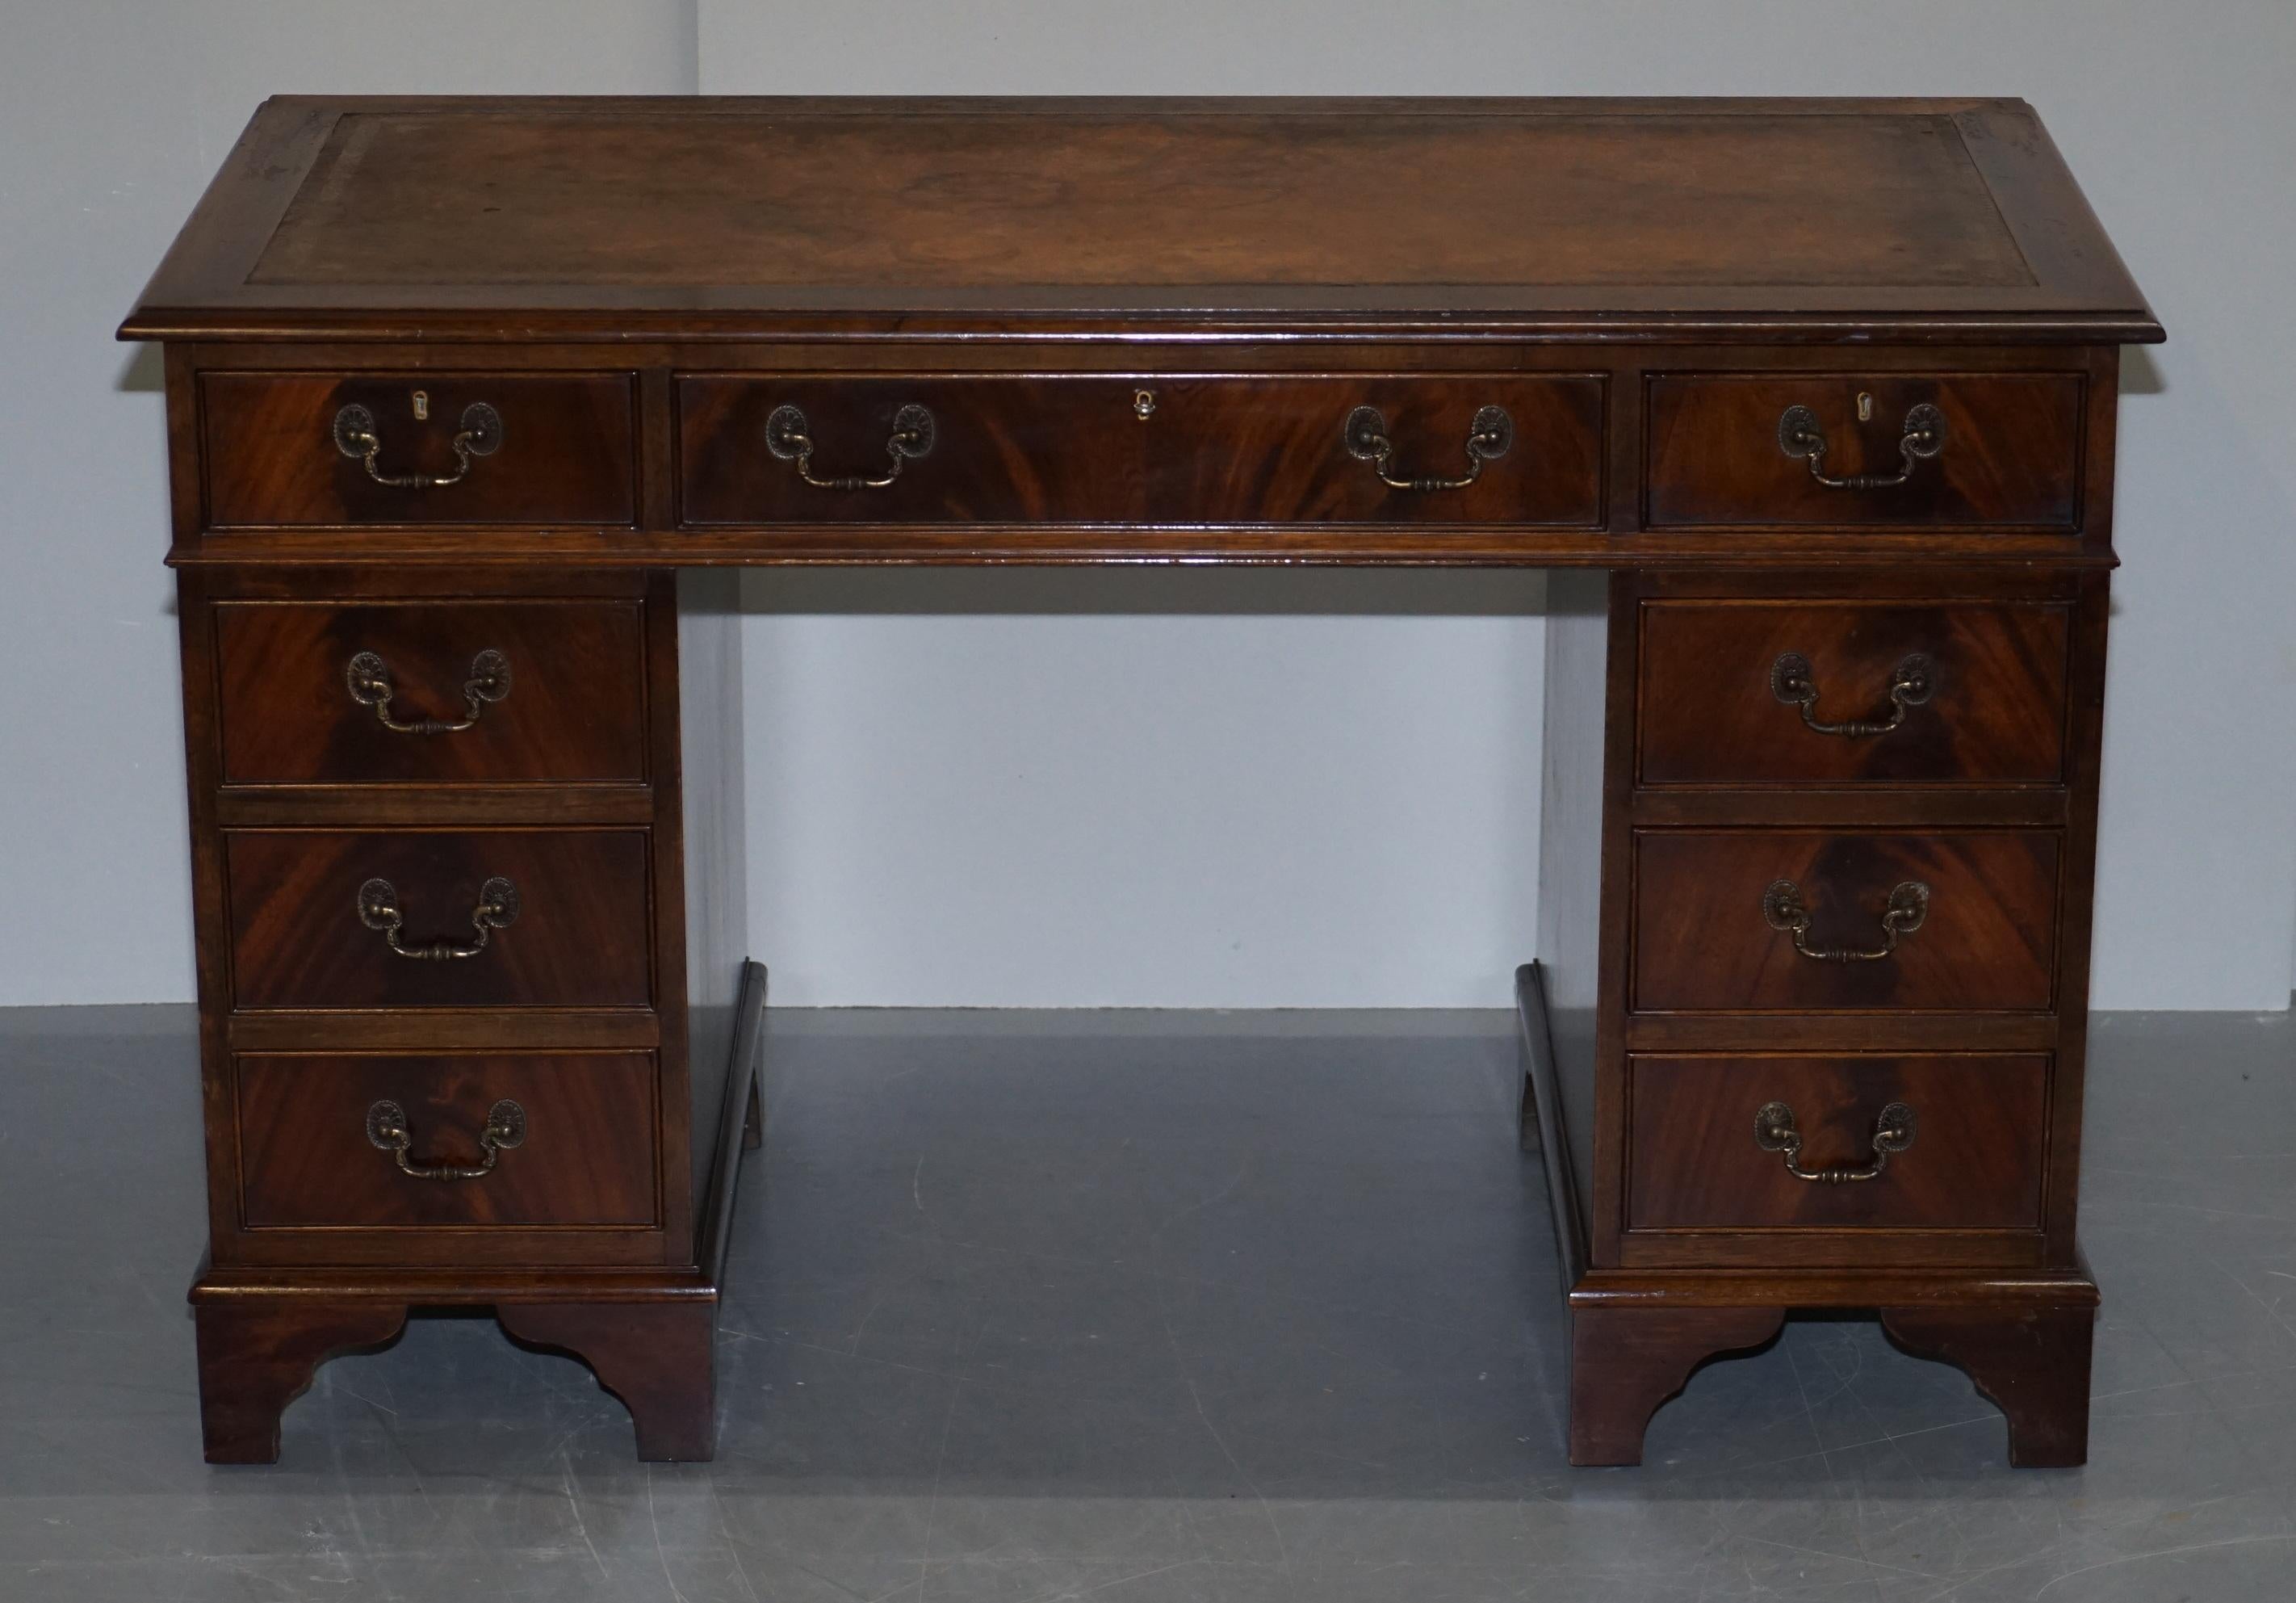 I am delighted to offer for sale this mahogany twin pedestal partner desk with original vintage brown leather top 

Please note the delivery fee listed is just a guide, it covers within the M25 only, for an accurate quote please send me your